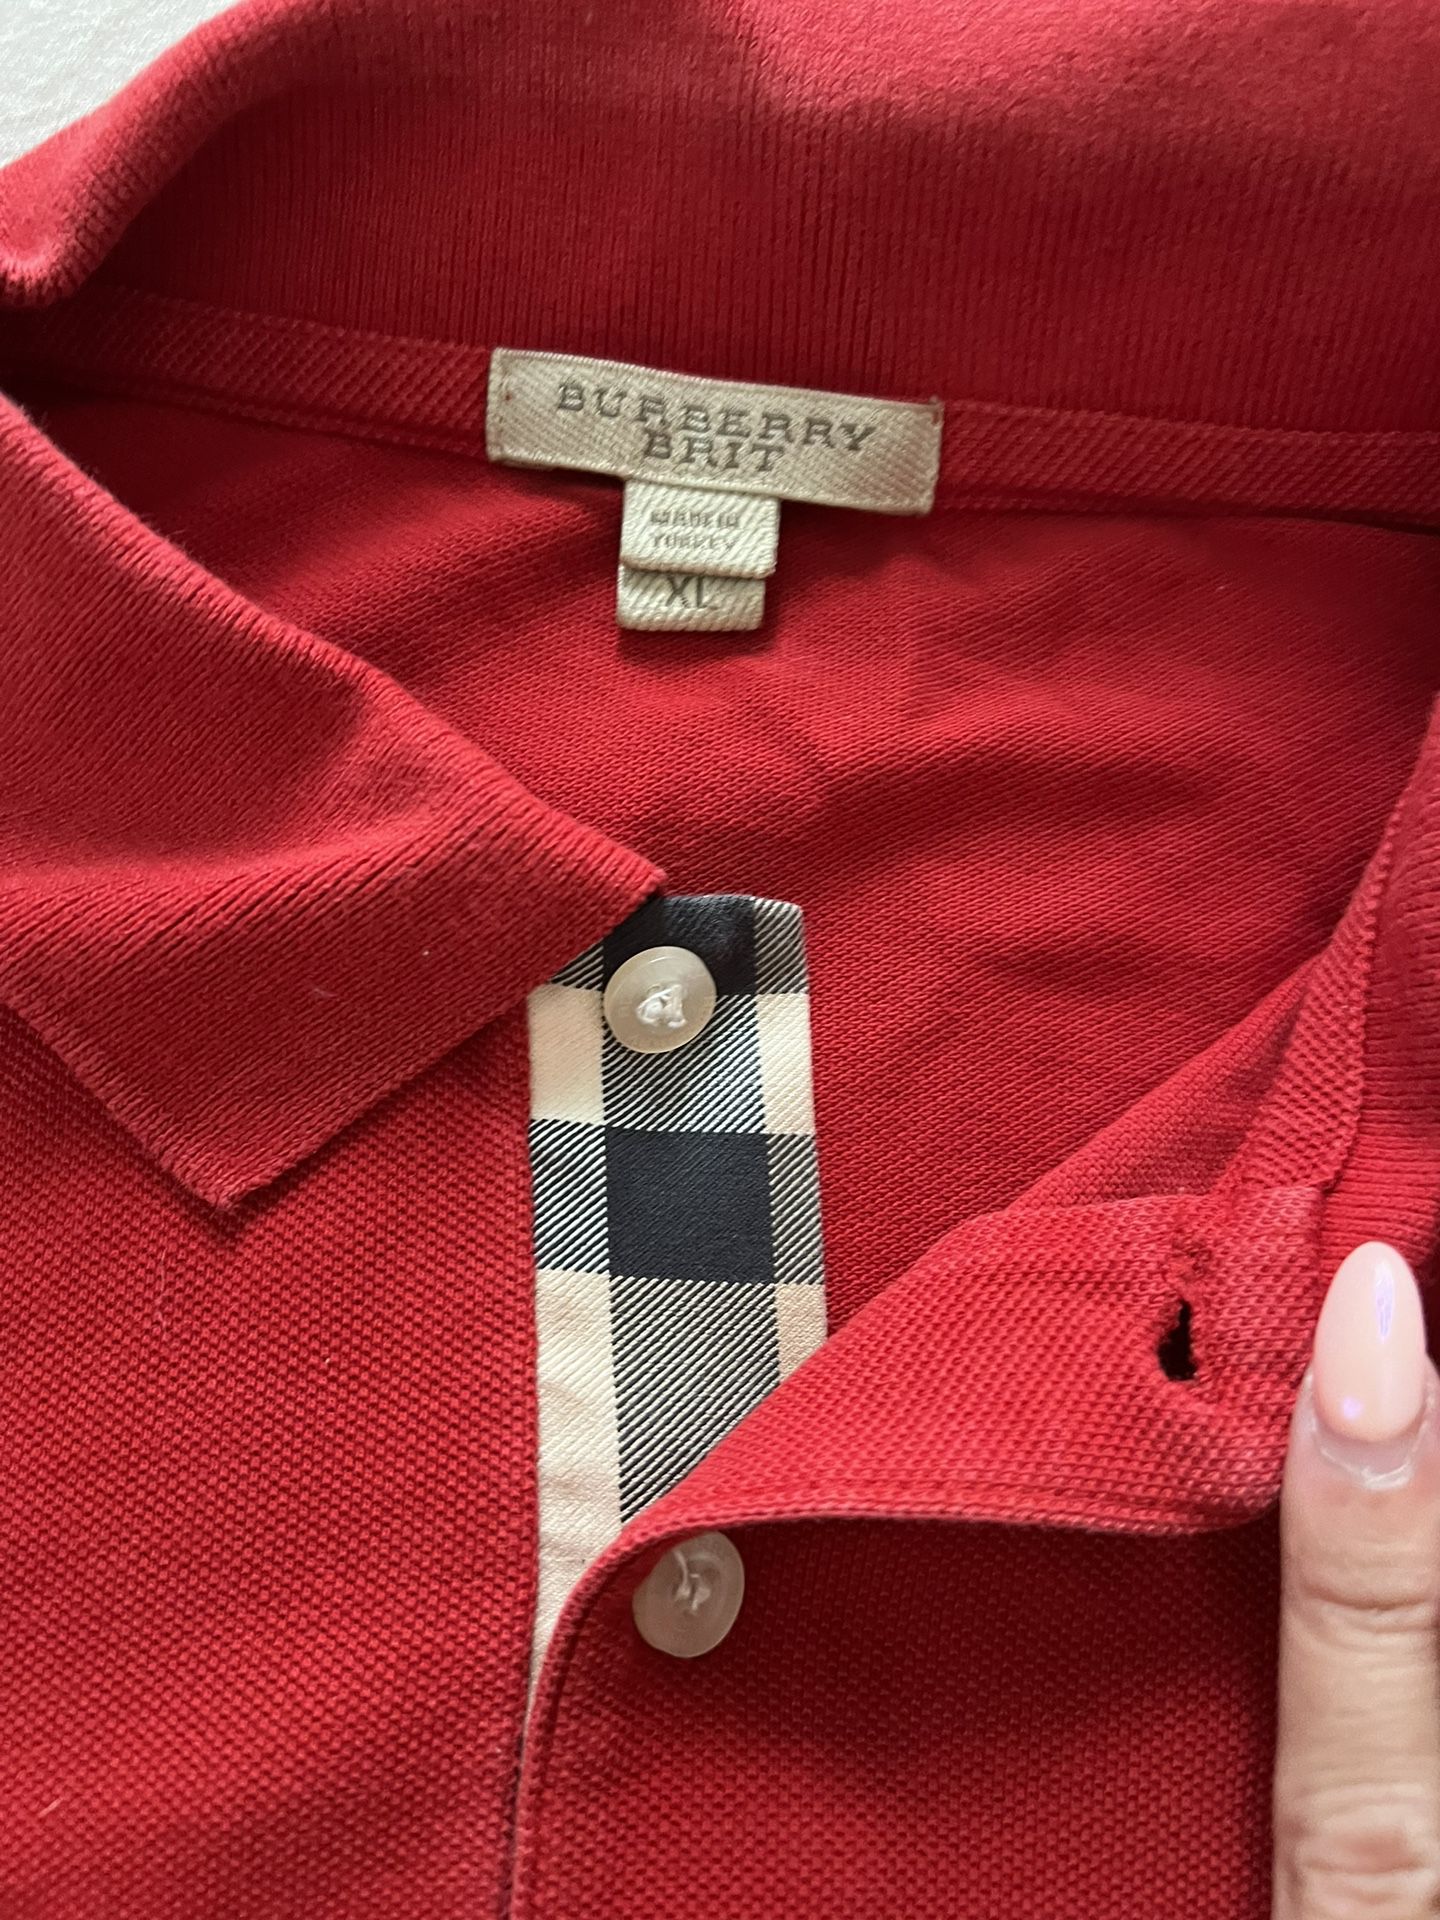 Burberry shirt real vs fake review. How to spot fake Burberry Brit shirts 